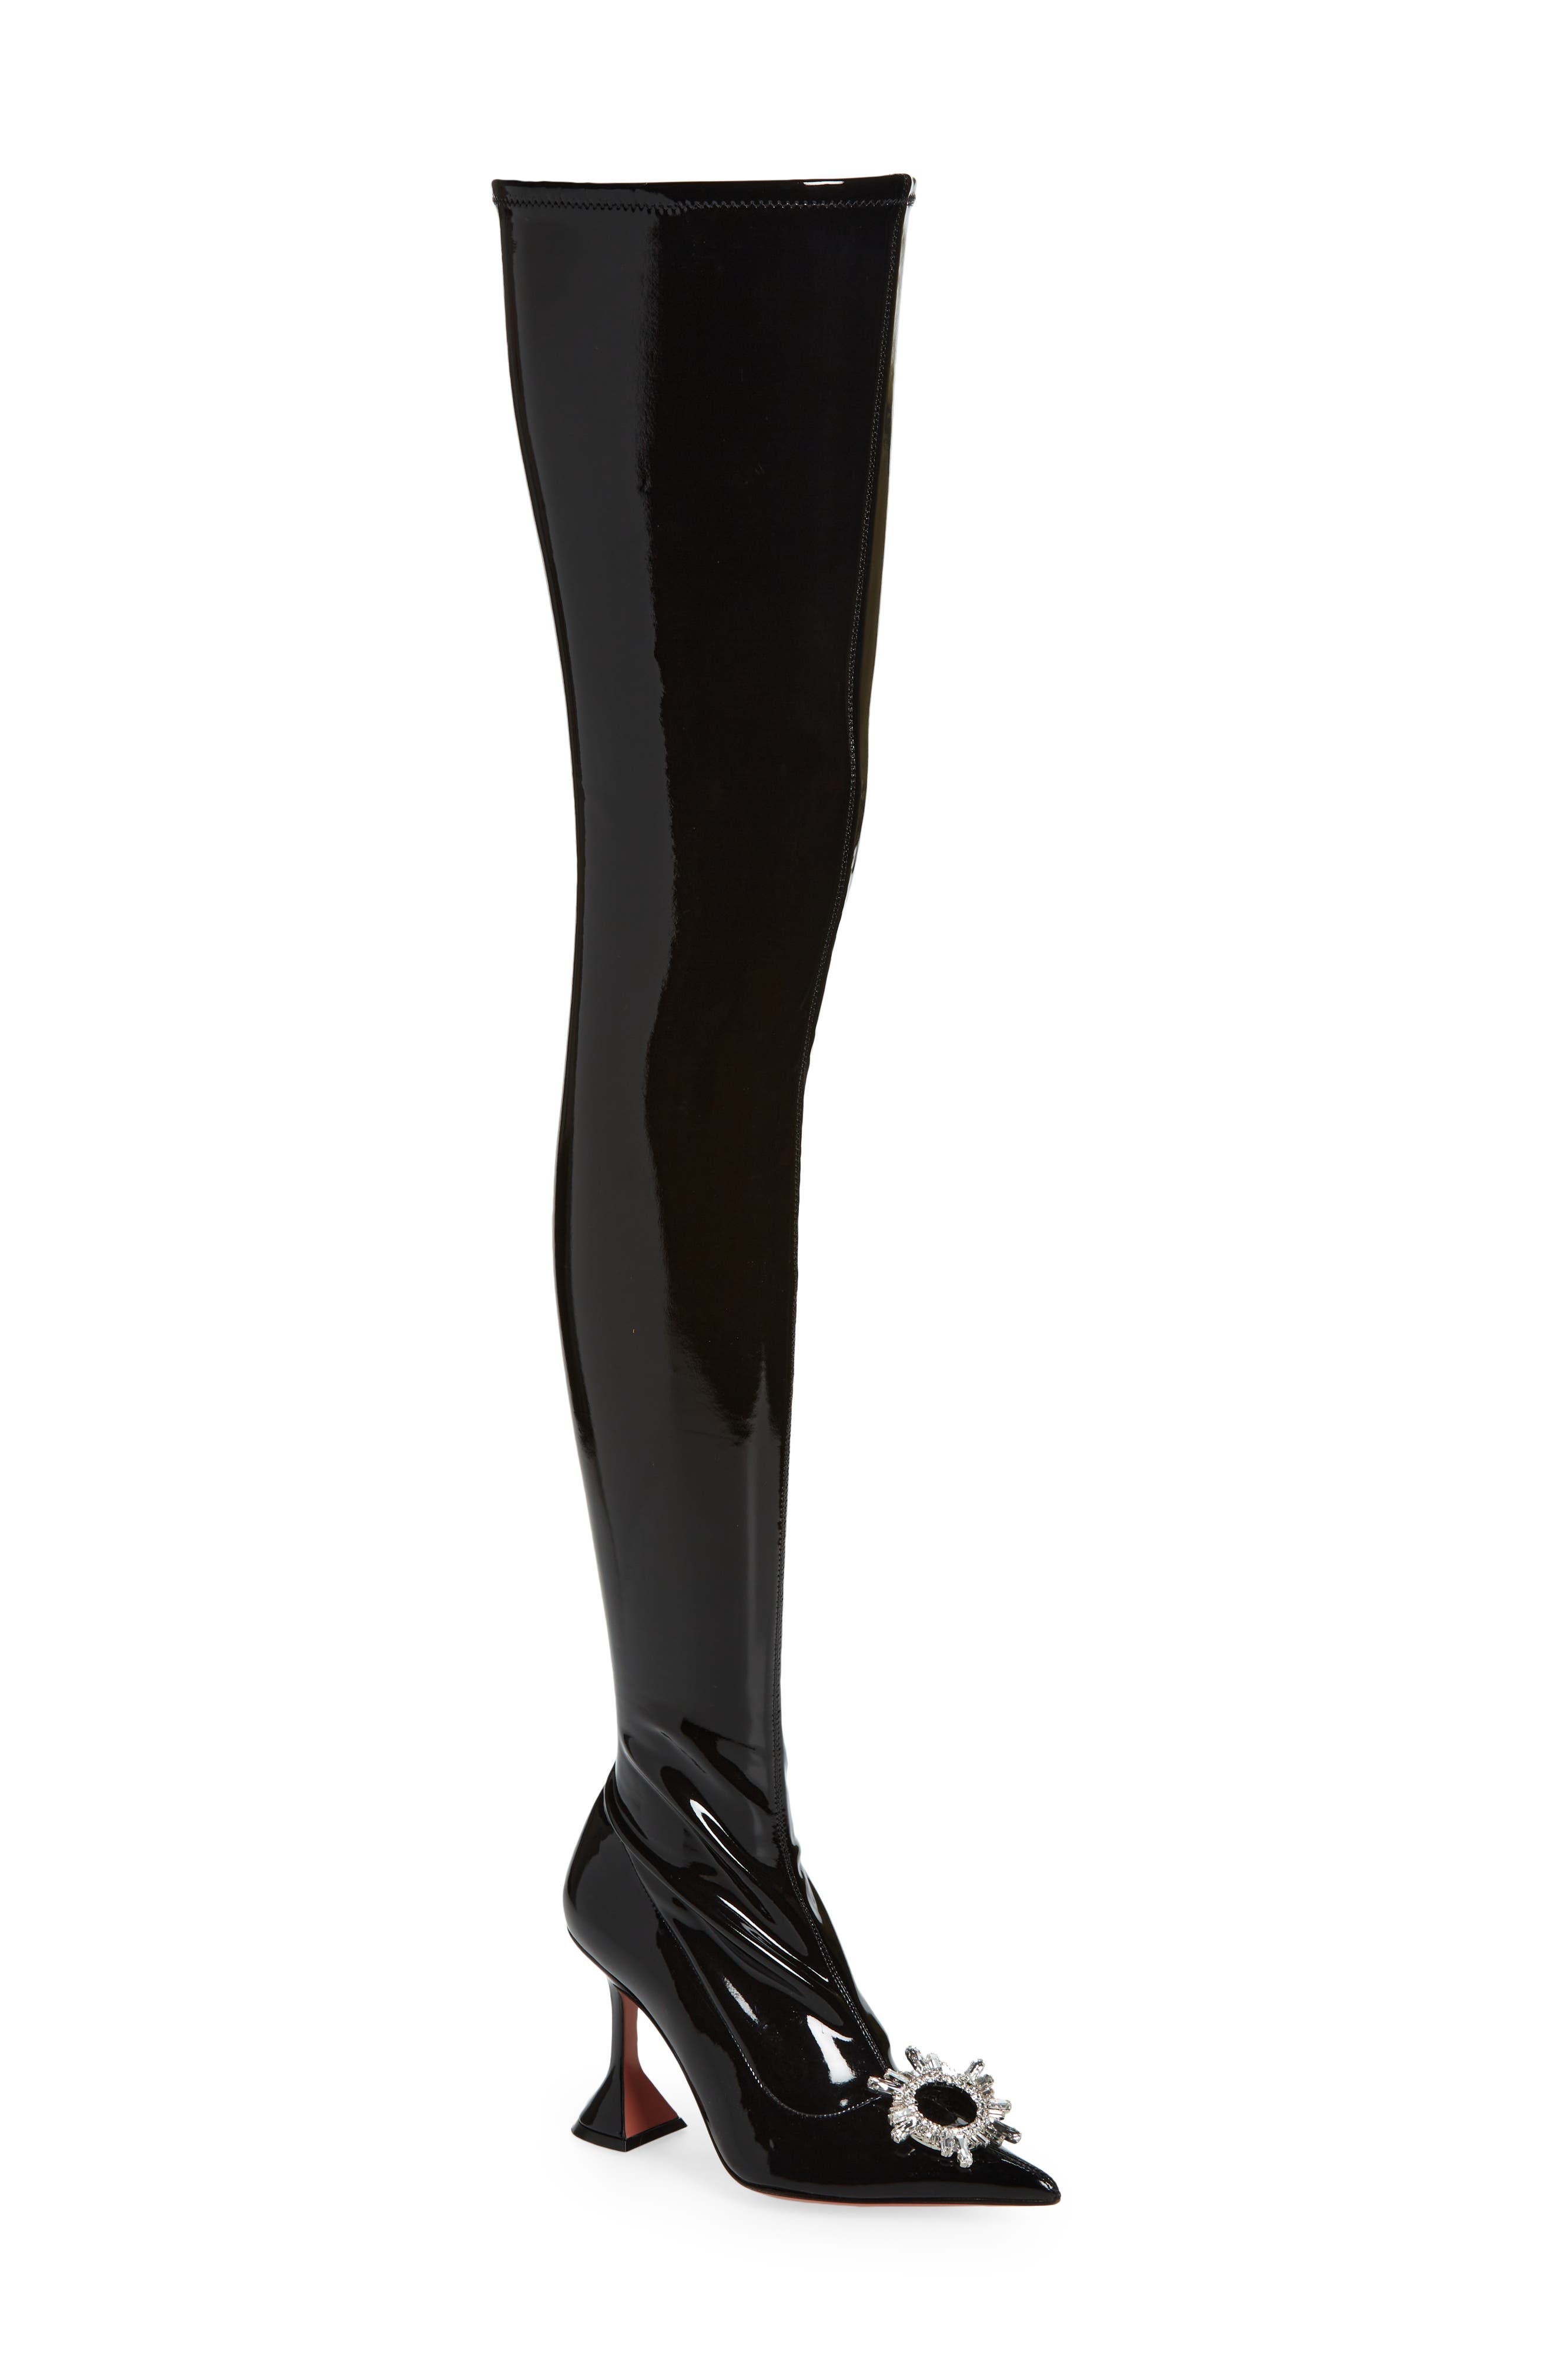 Amina Muaddi Begum Embellished Over the Knee Boot in Latex Black at Nordstrom, Size 6Us